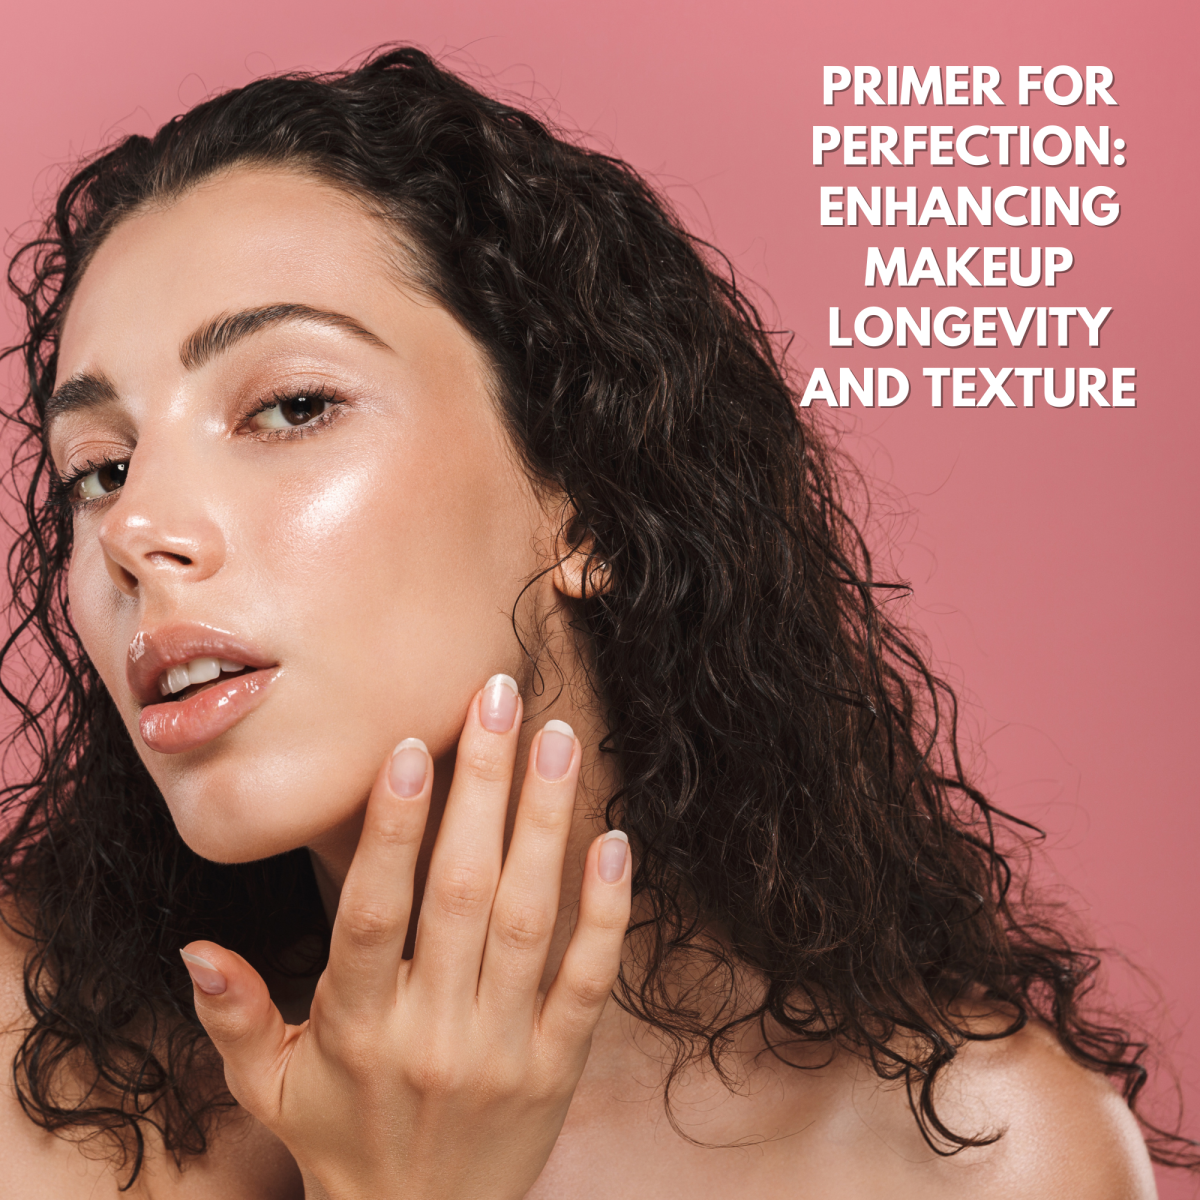 Primer for Perfection: Enhancing Makeup Longevity and Texture